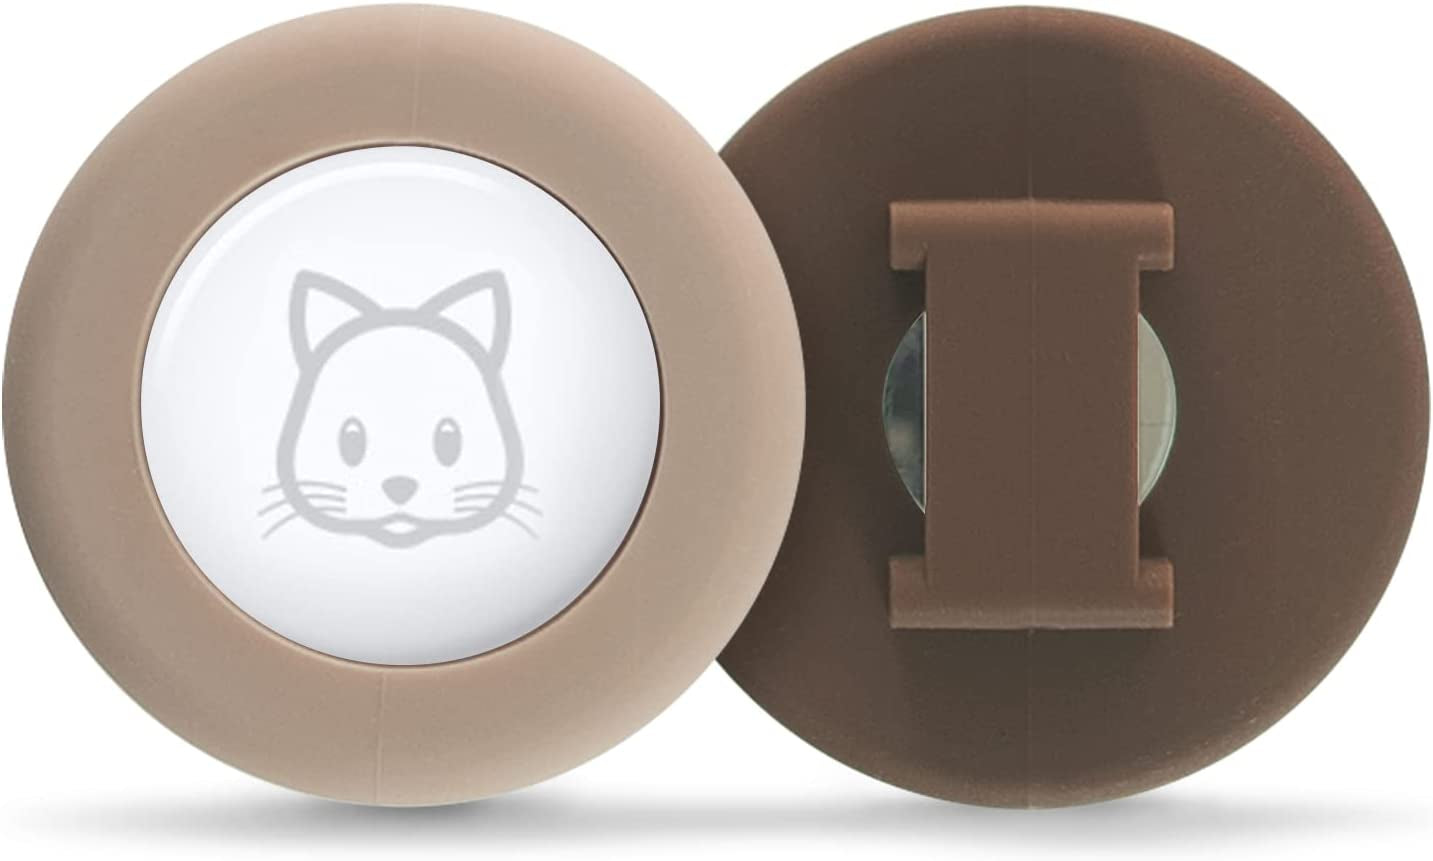 Sweet Baby Co. Airtag Cat Collar or Extra Small Dog Collar Holder 2 Pack, Fits Half Inch Collars for Small Pet, Compatible with Apple Air Tag, Waterproof GPS Tracker Case Kitten Cats